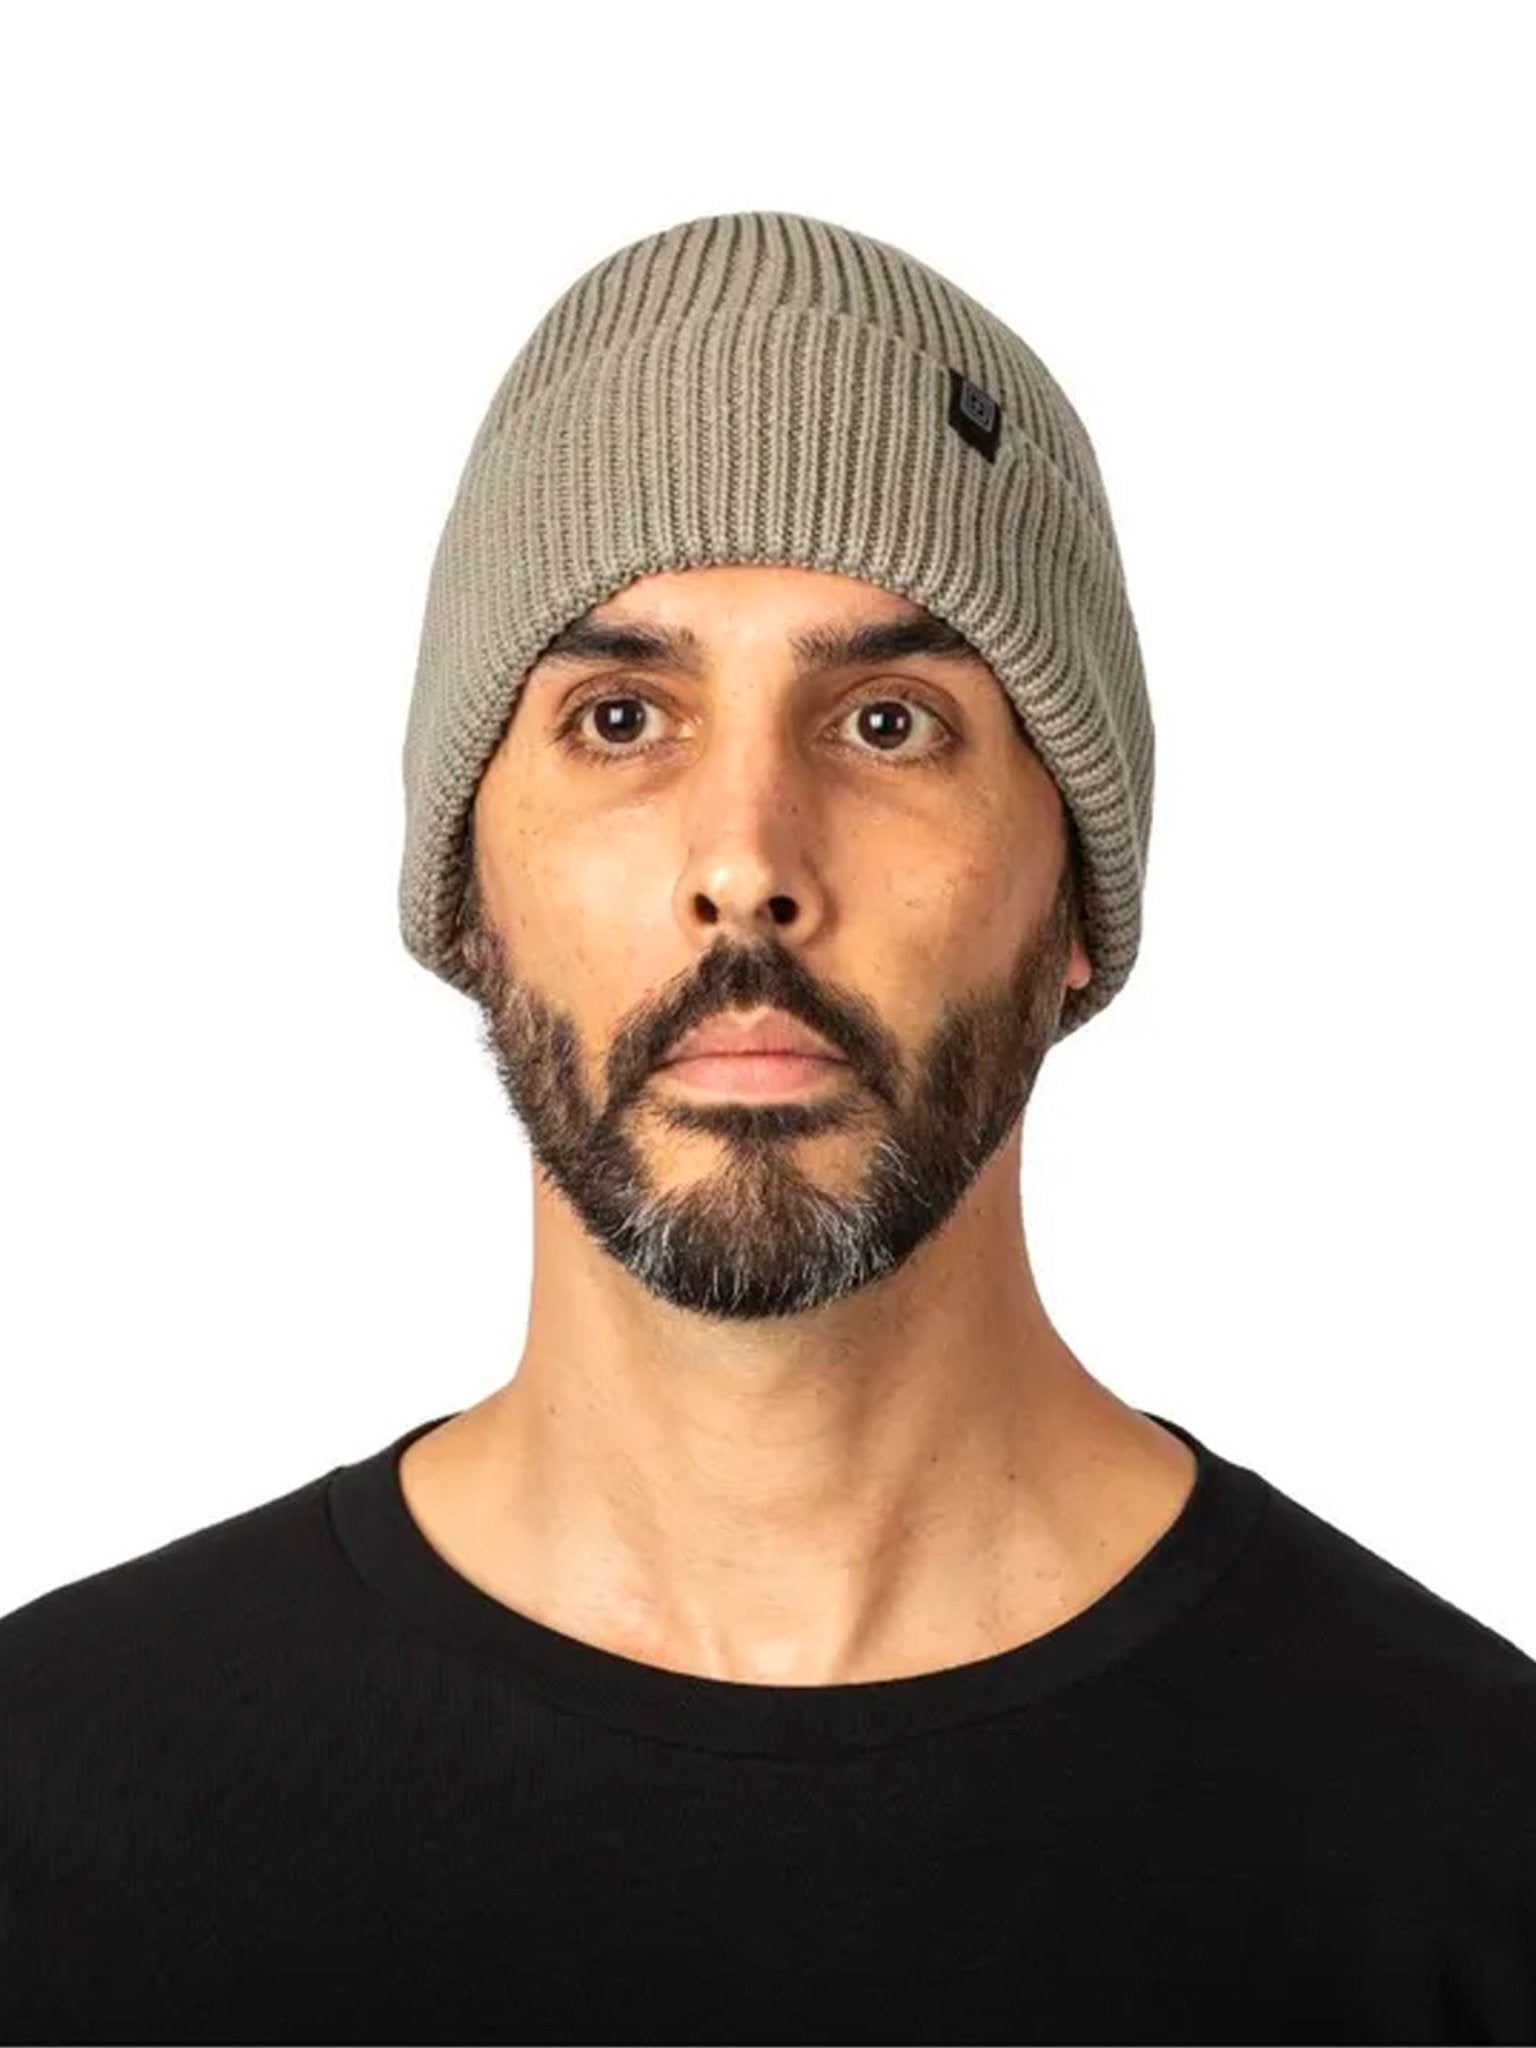 4elementsclothing5.11 Tactical5.11 Tactical - 5.11 Tactical Cotton Knitted Boistel Beanie Hat - Style 89163Hats89163-019